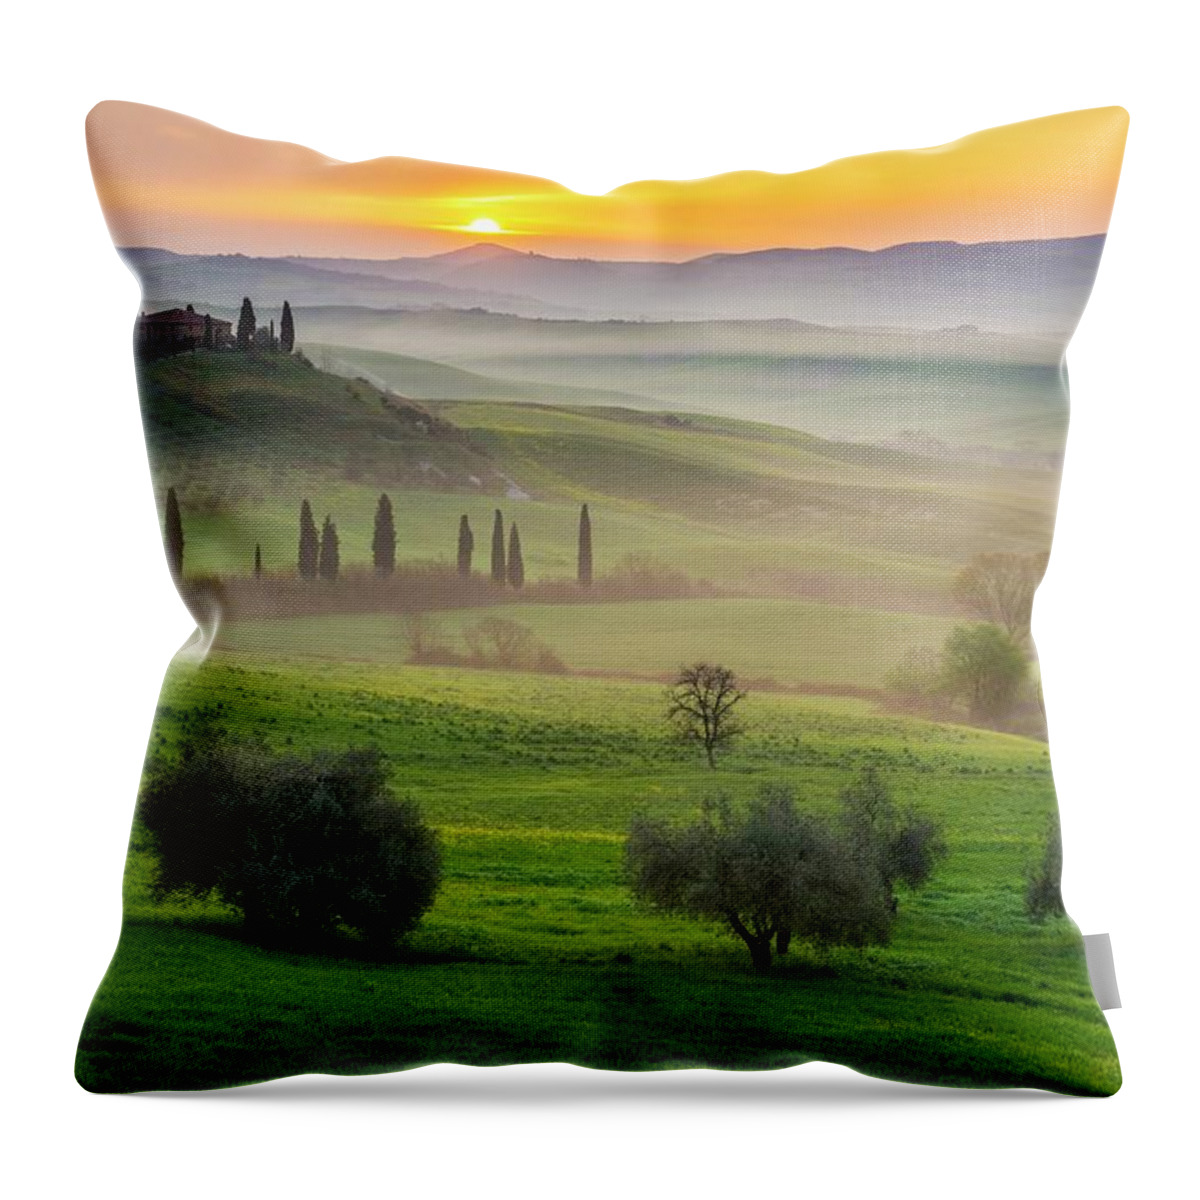 Estock Throw Pillow featuring the digital art Tuscany, Country House, Italy by Stefano Coltelli